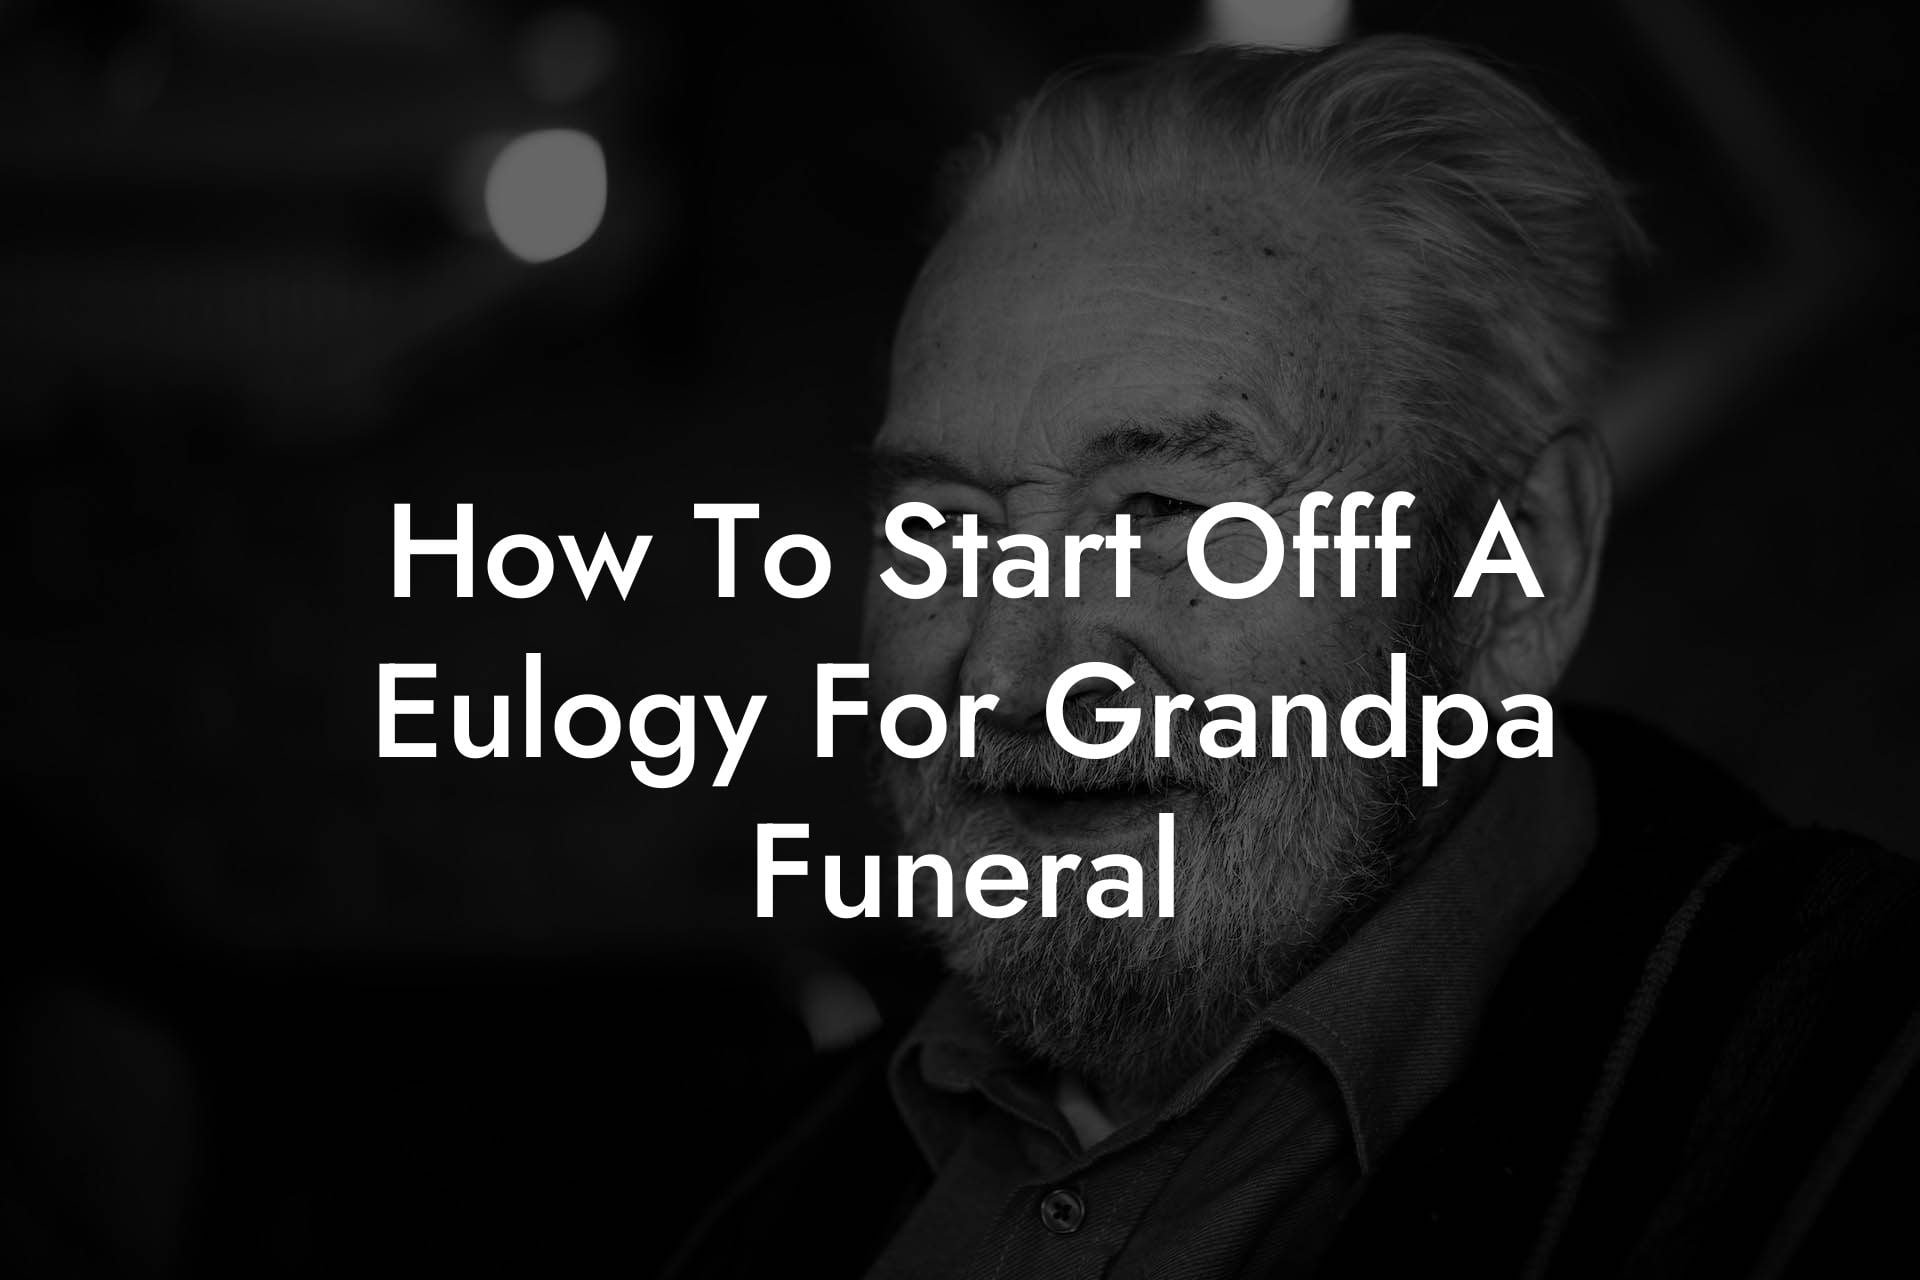 How To Start Offf A Eulogy For Grandpa Funeral